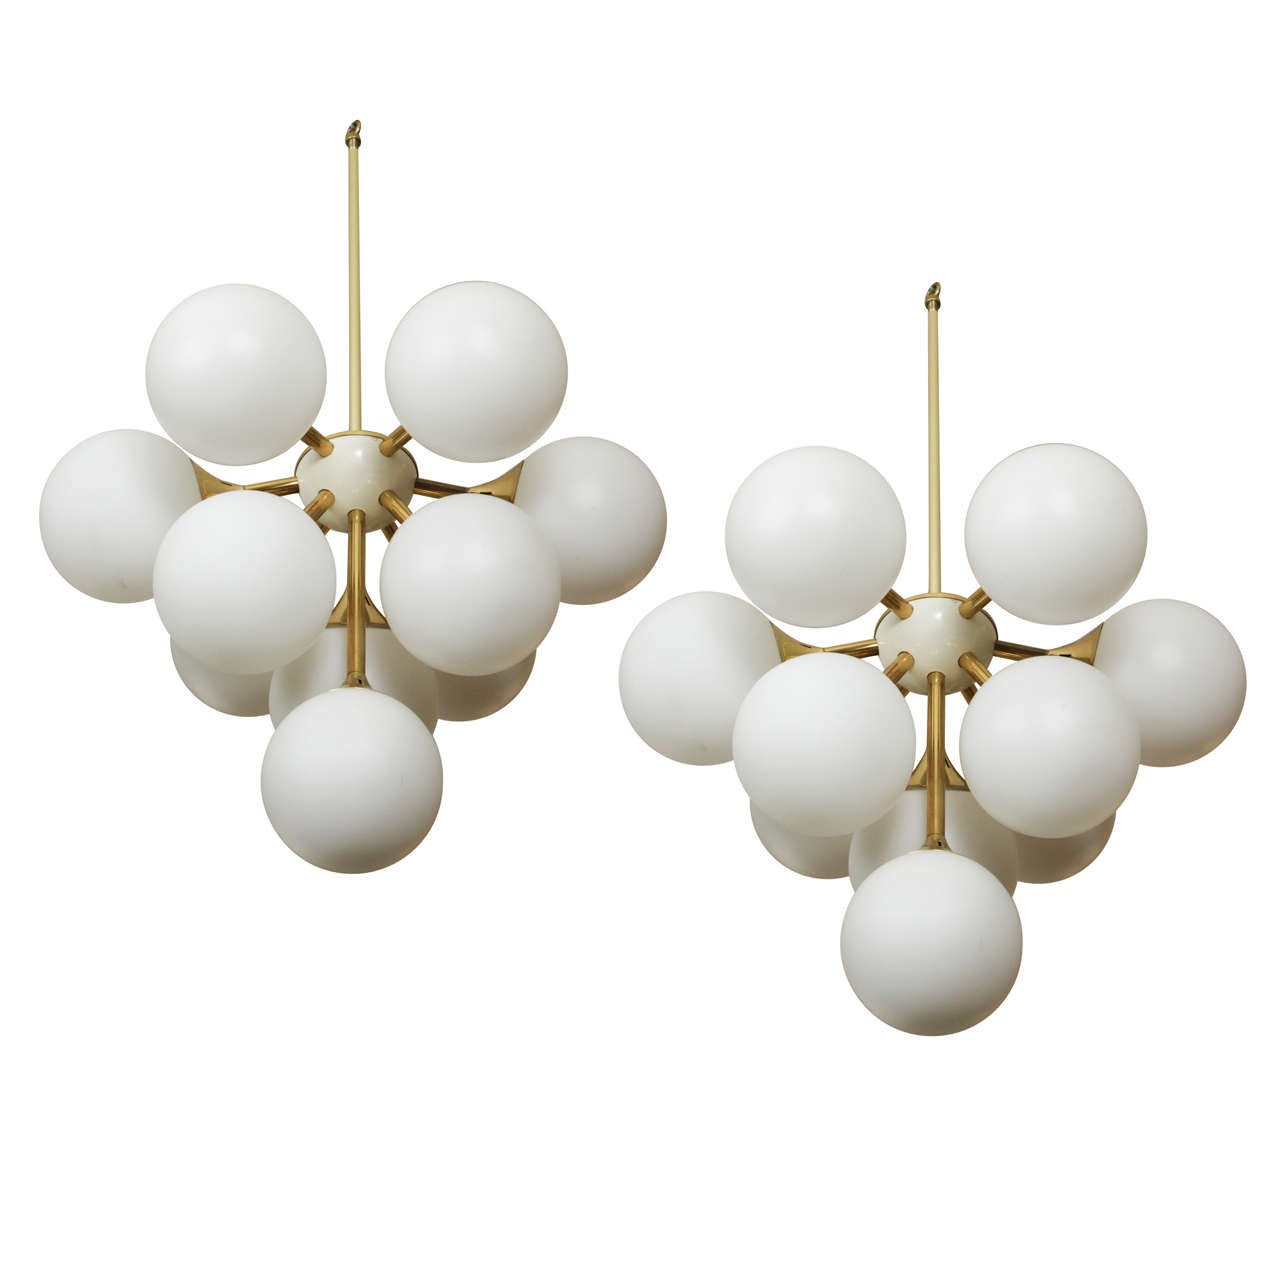 Pair of Spectacular Sputnik Fixtures in the Style of Stilnovo